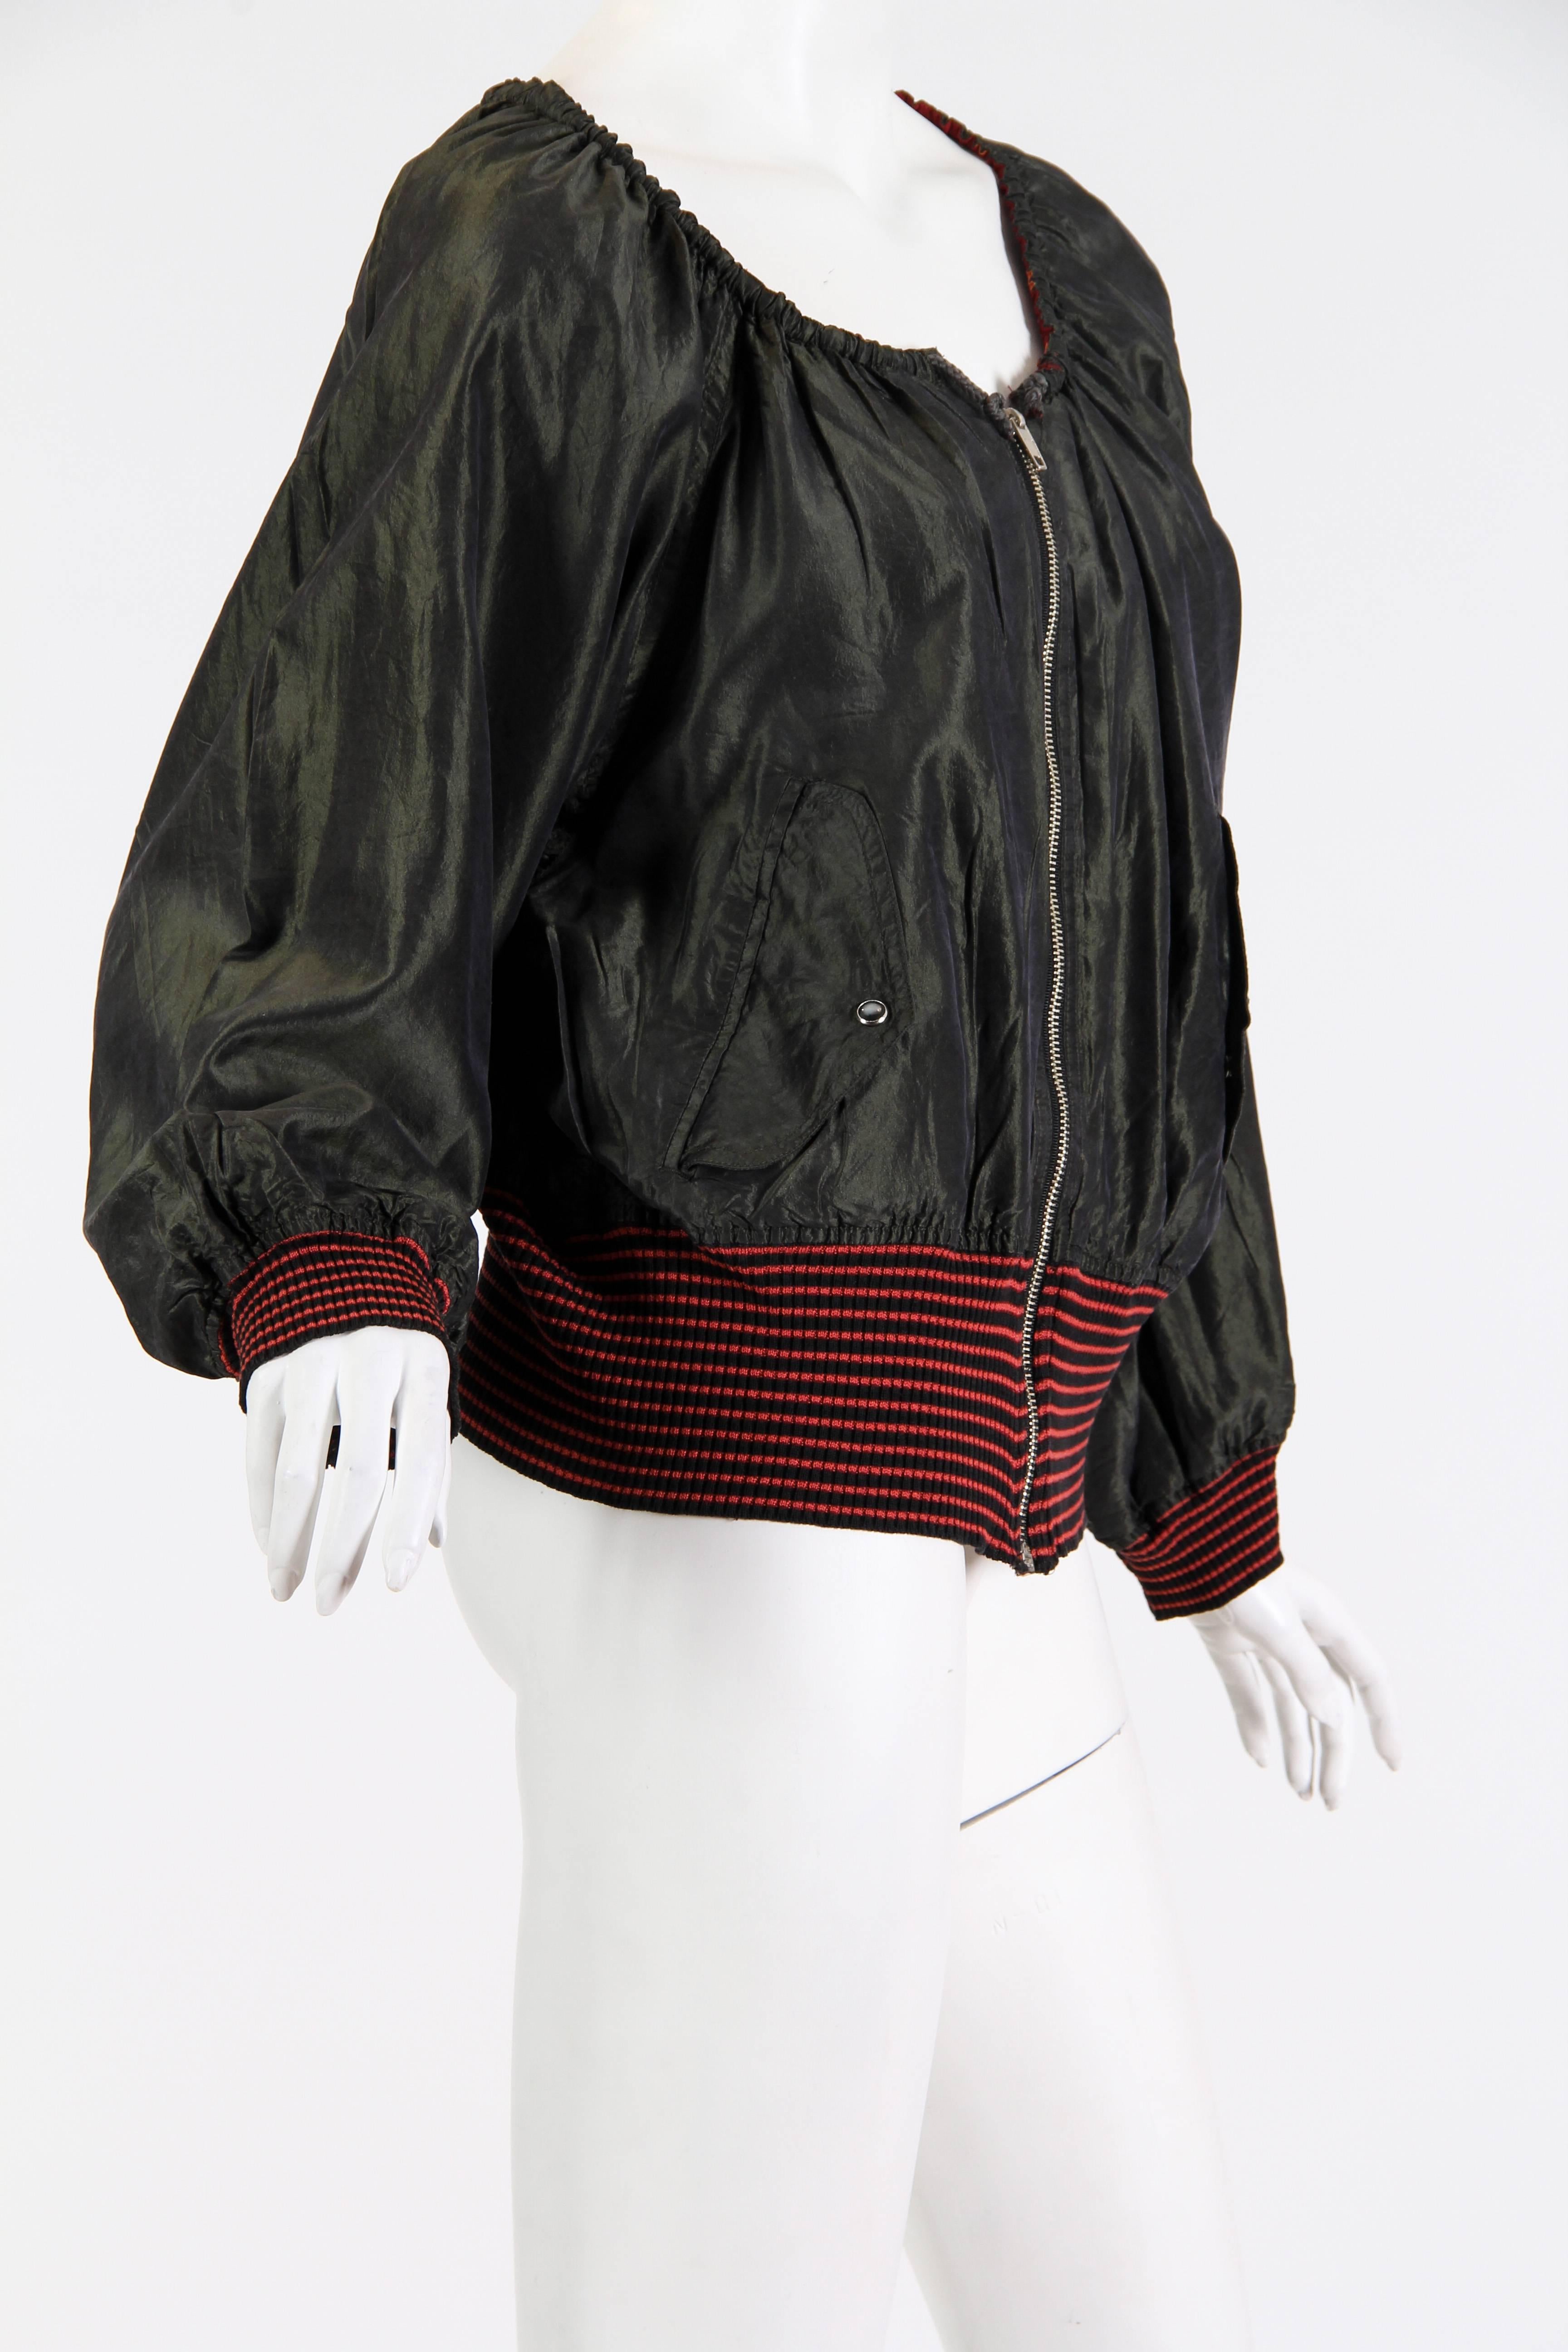 Reversible Polka Dot Jean Paul Gaultier Military Bomber Jacket In Excellent Condition In New York, NY